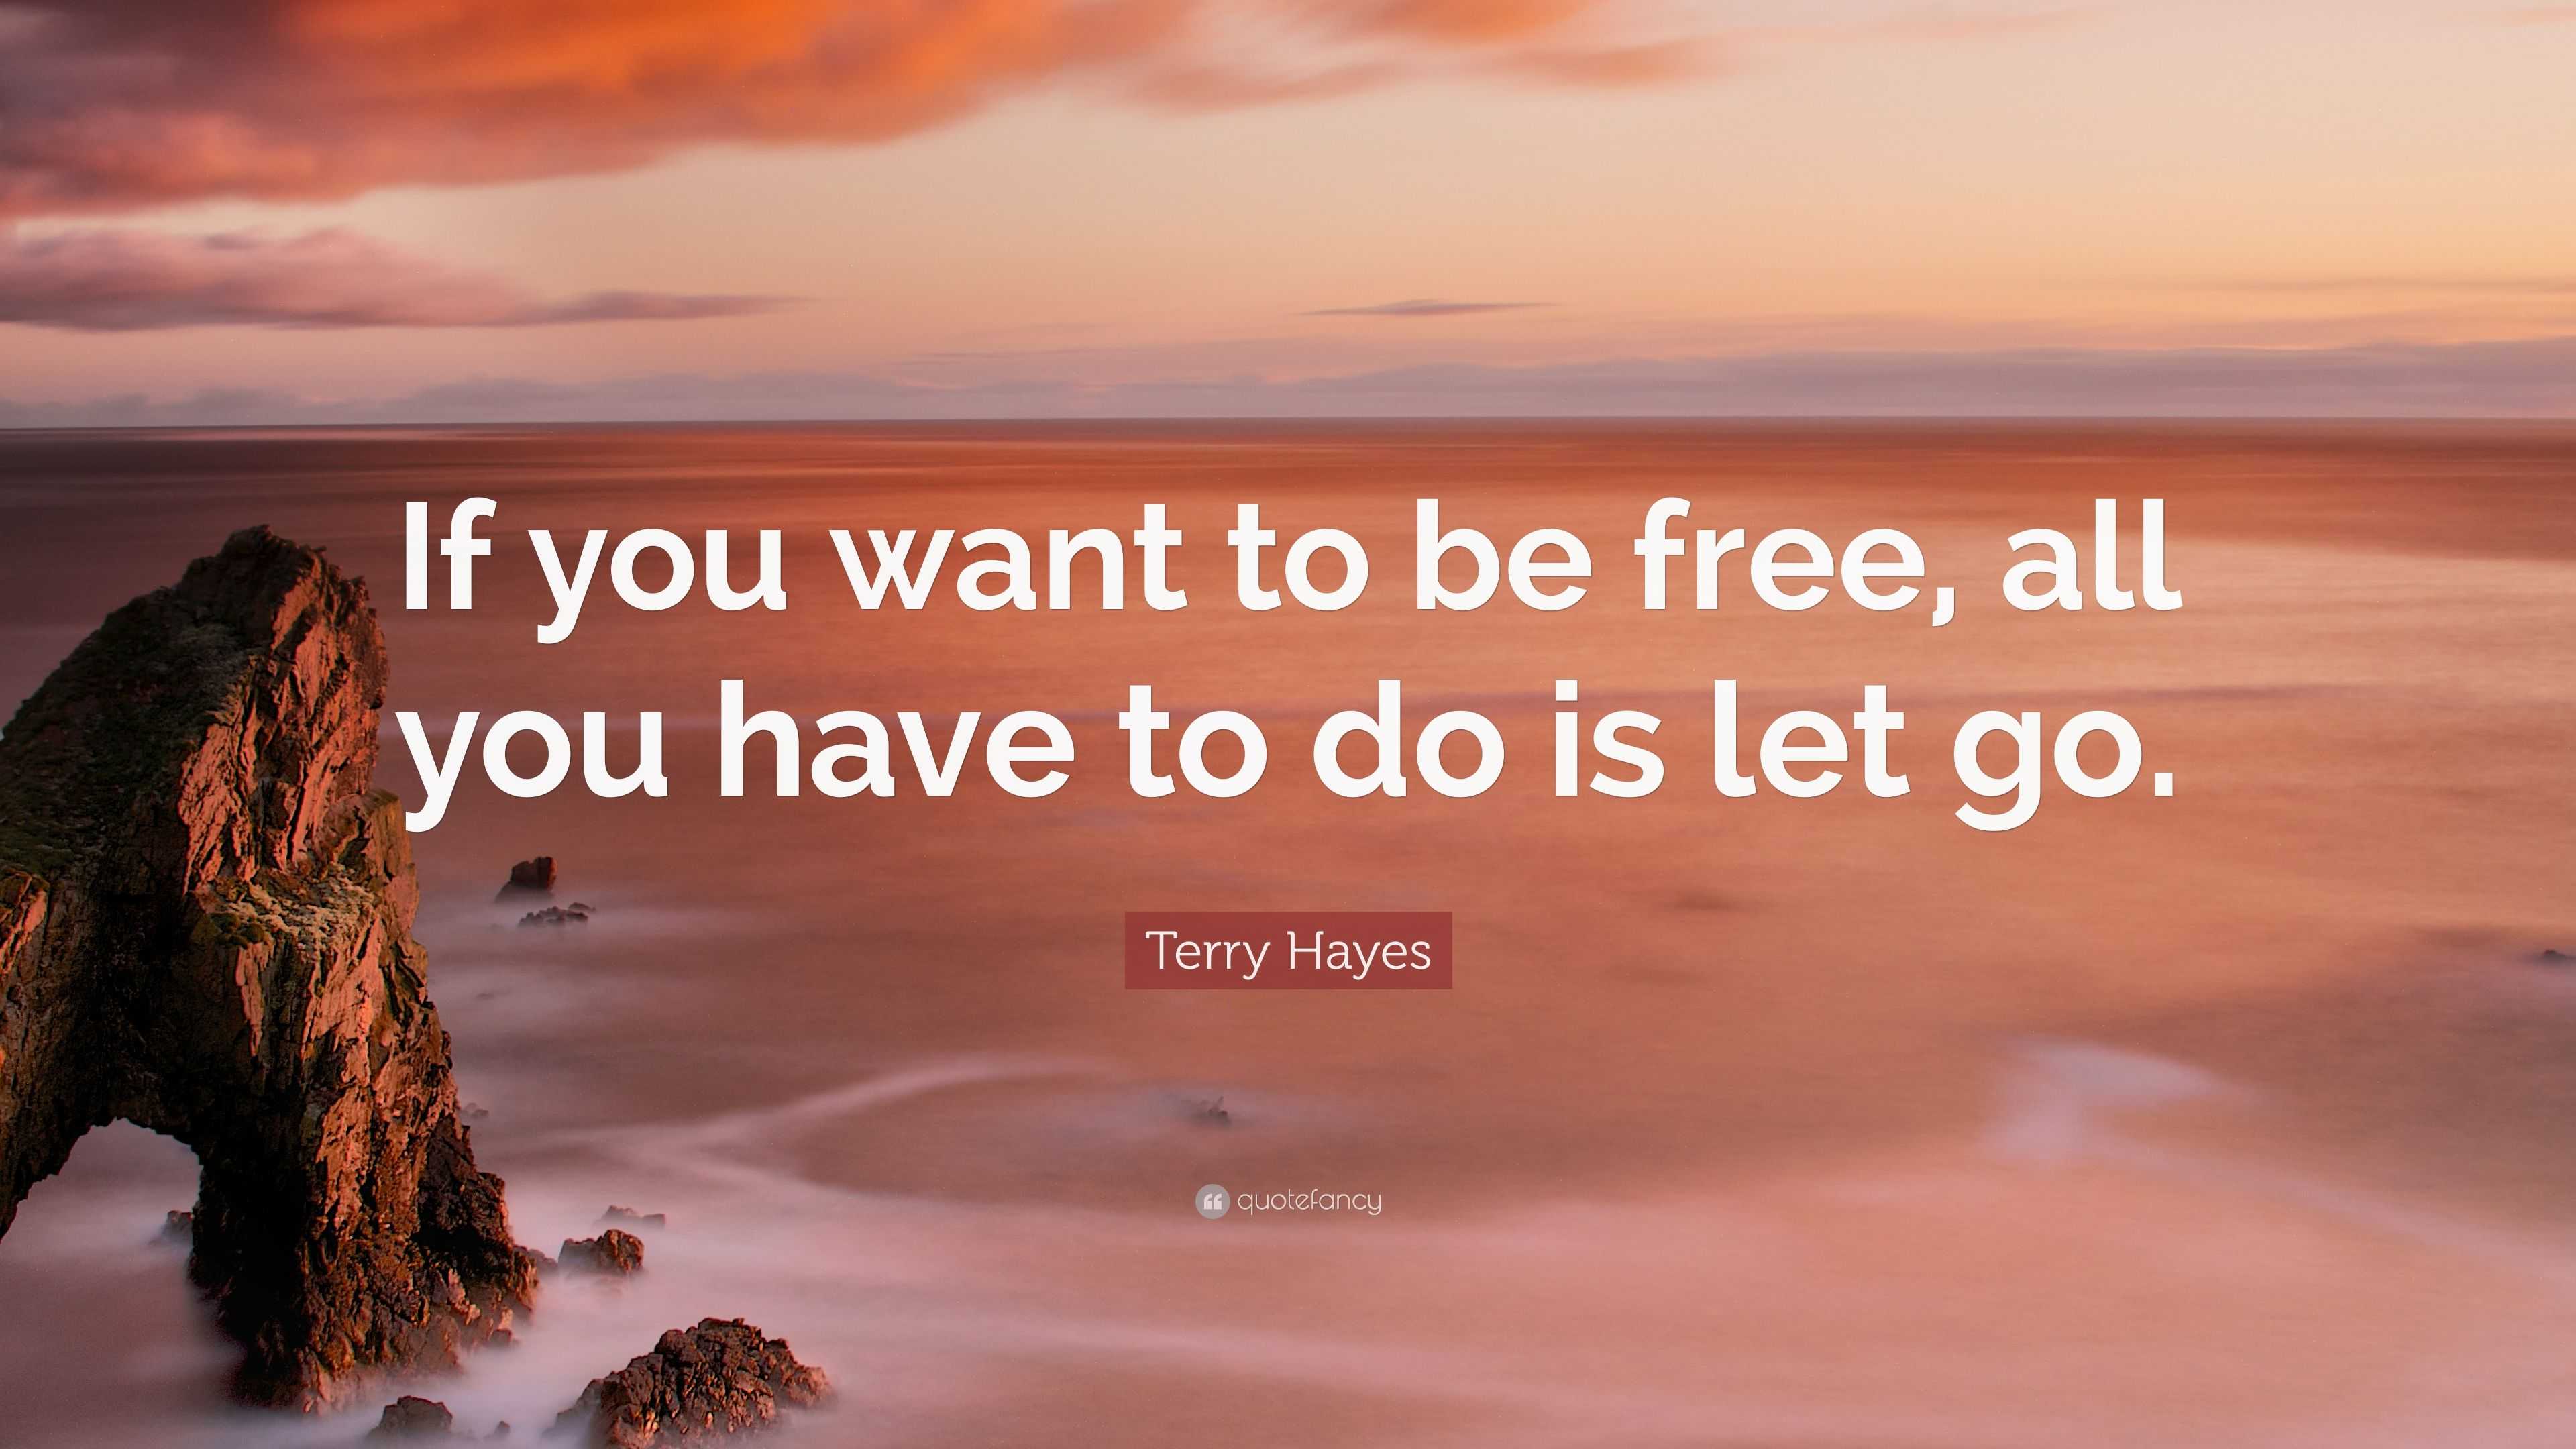 Quotes 'nd Notes - To be free you have to let go. —via